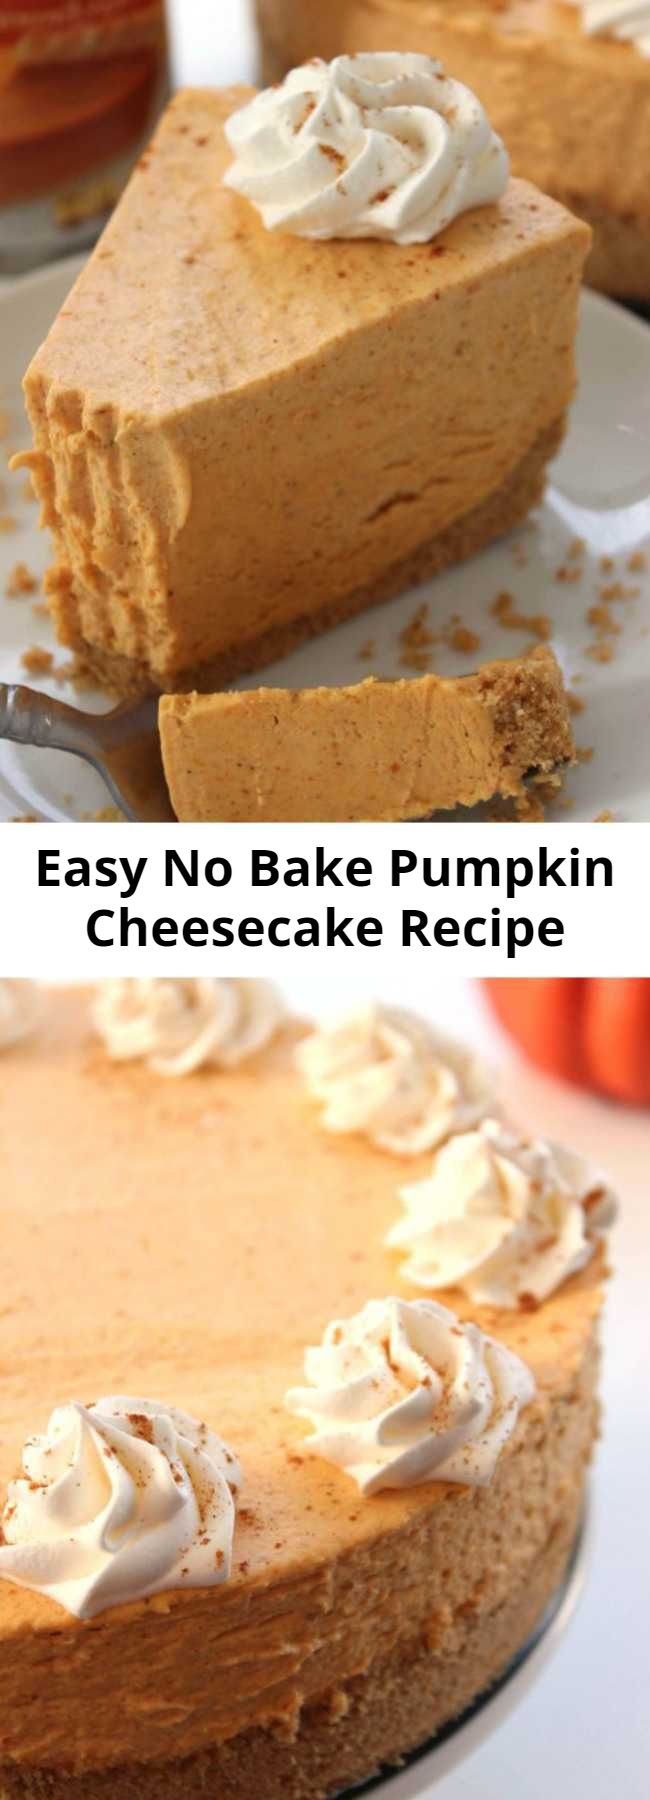 Easy No Bake Pumpkin Cheesecake Recipe - This No Bake Pumpkin Cheesecake will make for a super easy fall and Holiday dessert. With just a few ingredients and very little time, you can have a pumpkin dessert that looks and tastes like a million bucks.